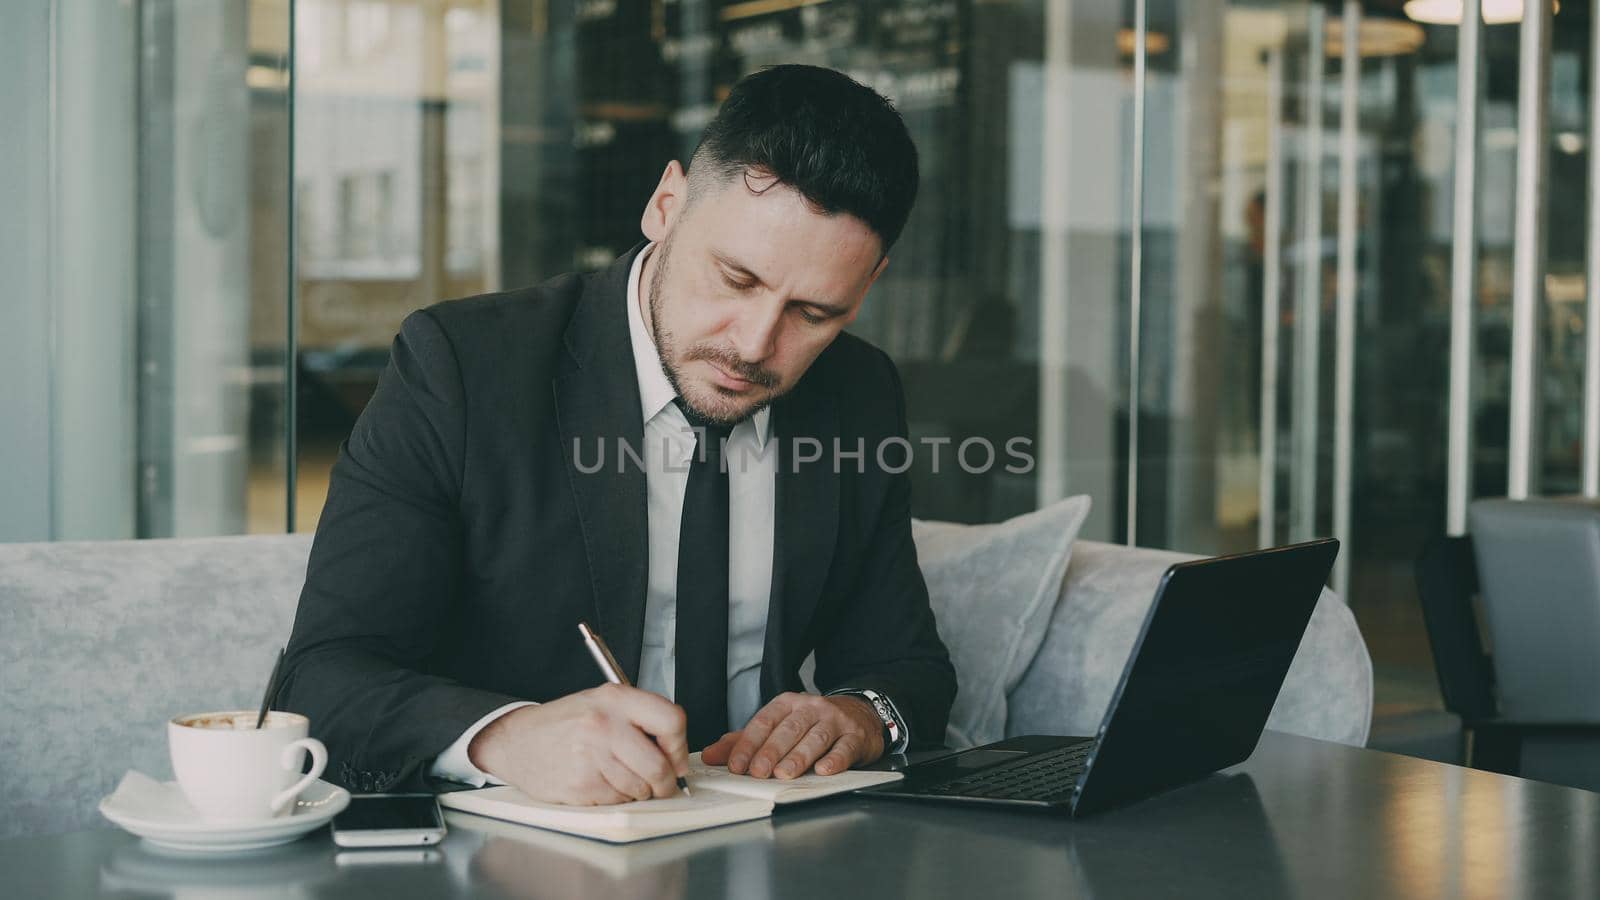 Smart Caucasian businessman using laptop computer and writing down information in his notepad in glassy cafe having coffee cup on his table. A cup of coffee is on his table.